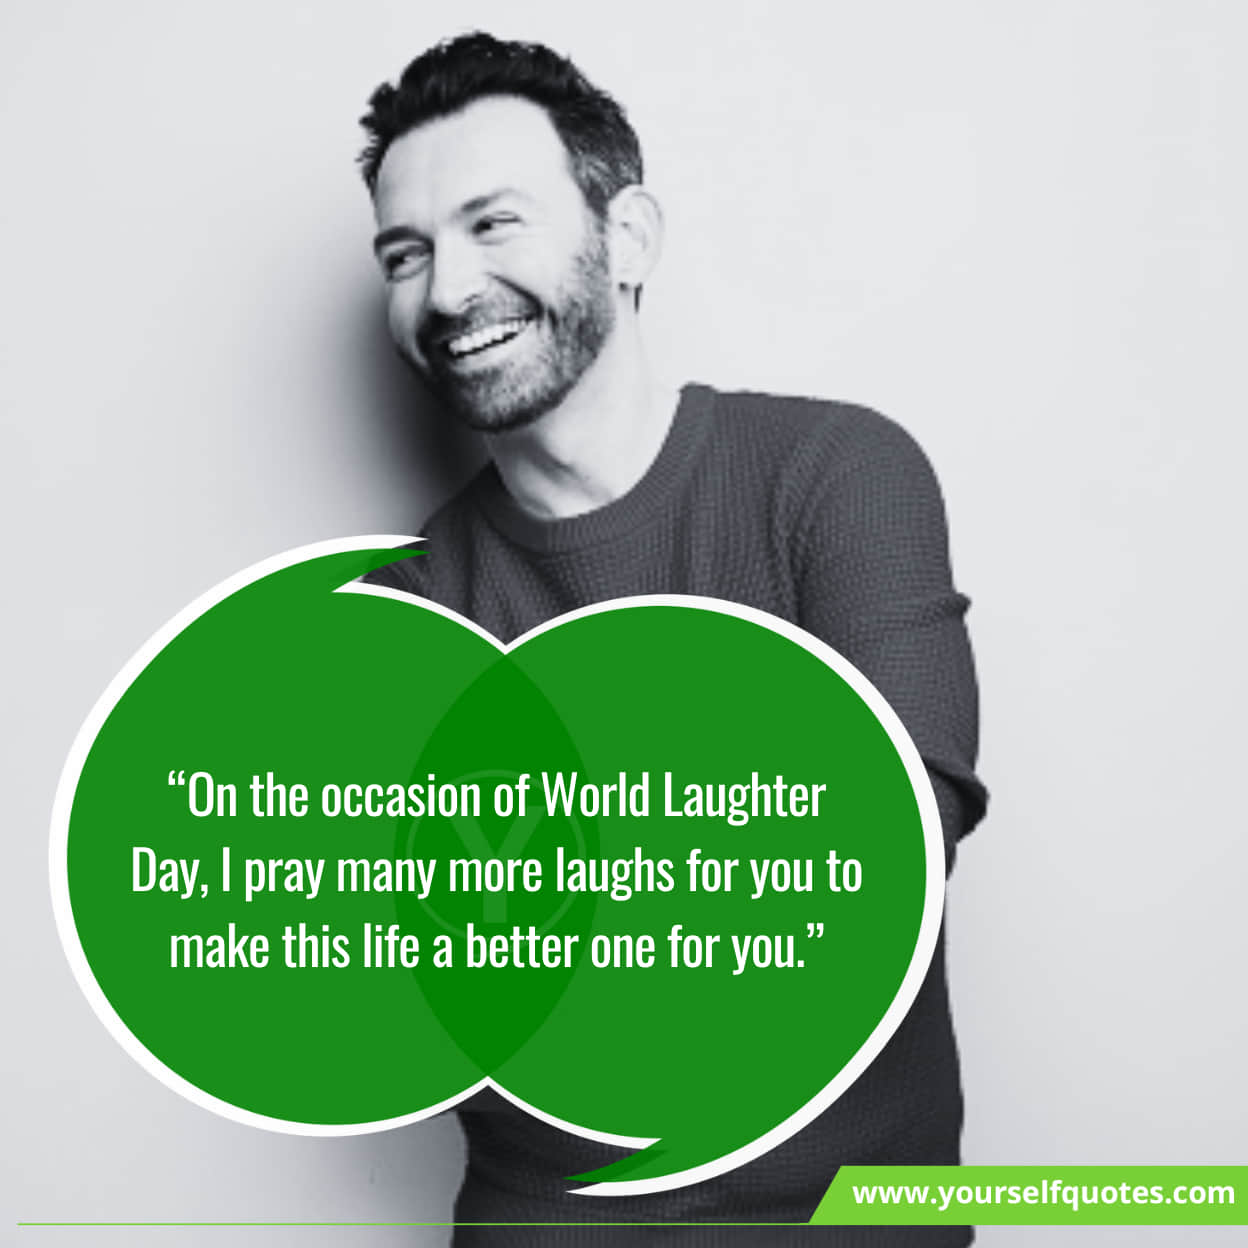 World Laughter Day Messages